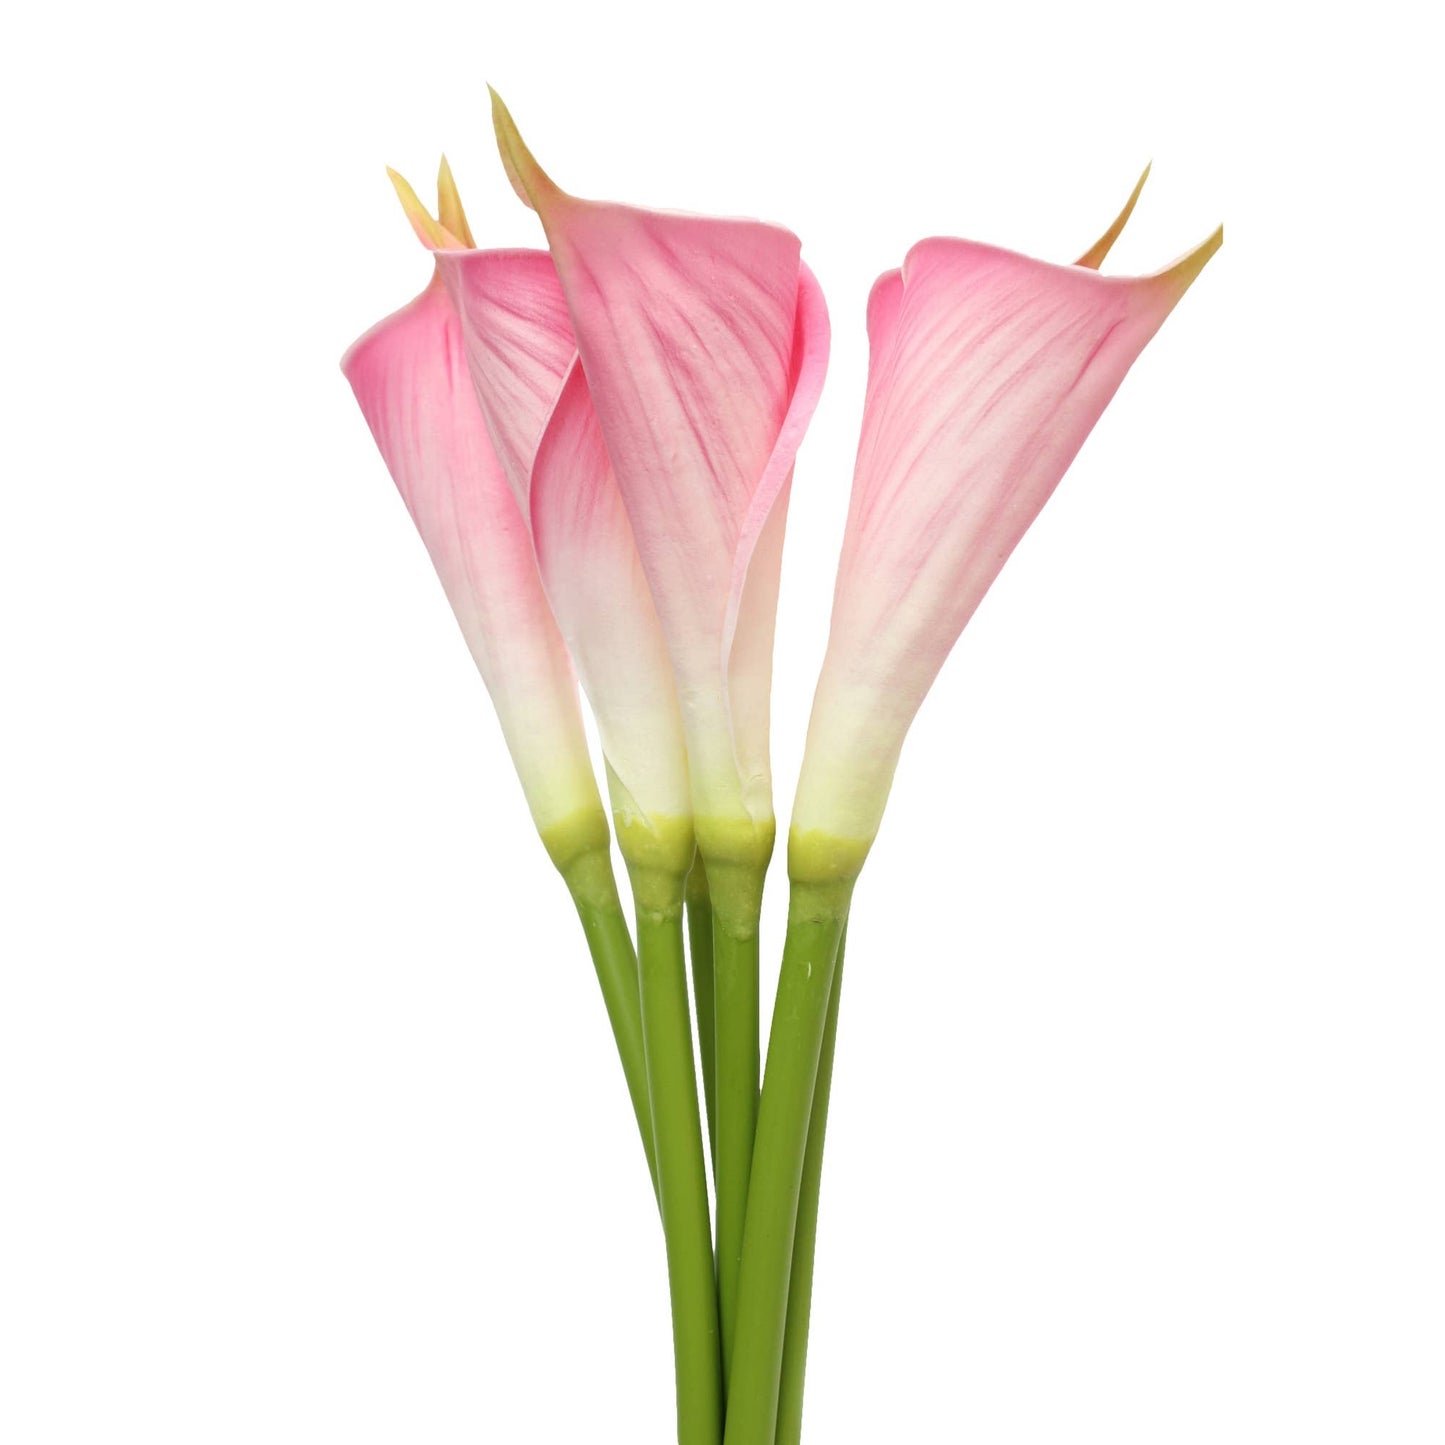 24" Long Premium Lifelike Real Touch Artificial Calla lily